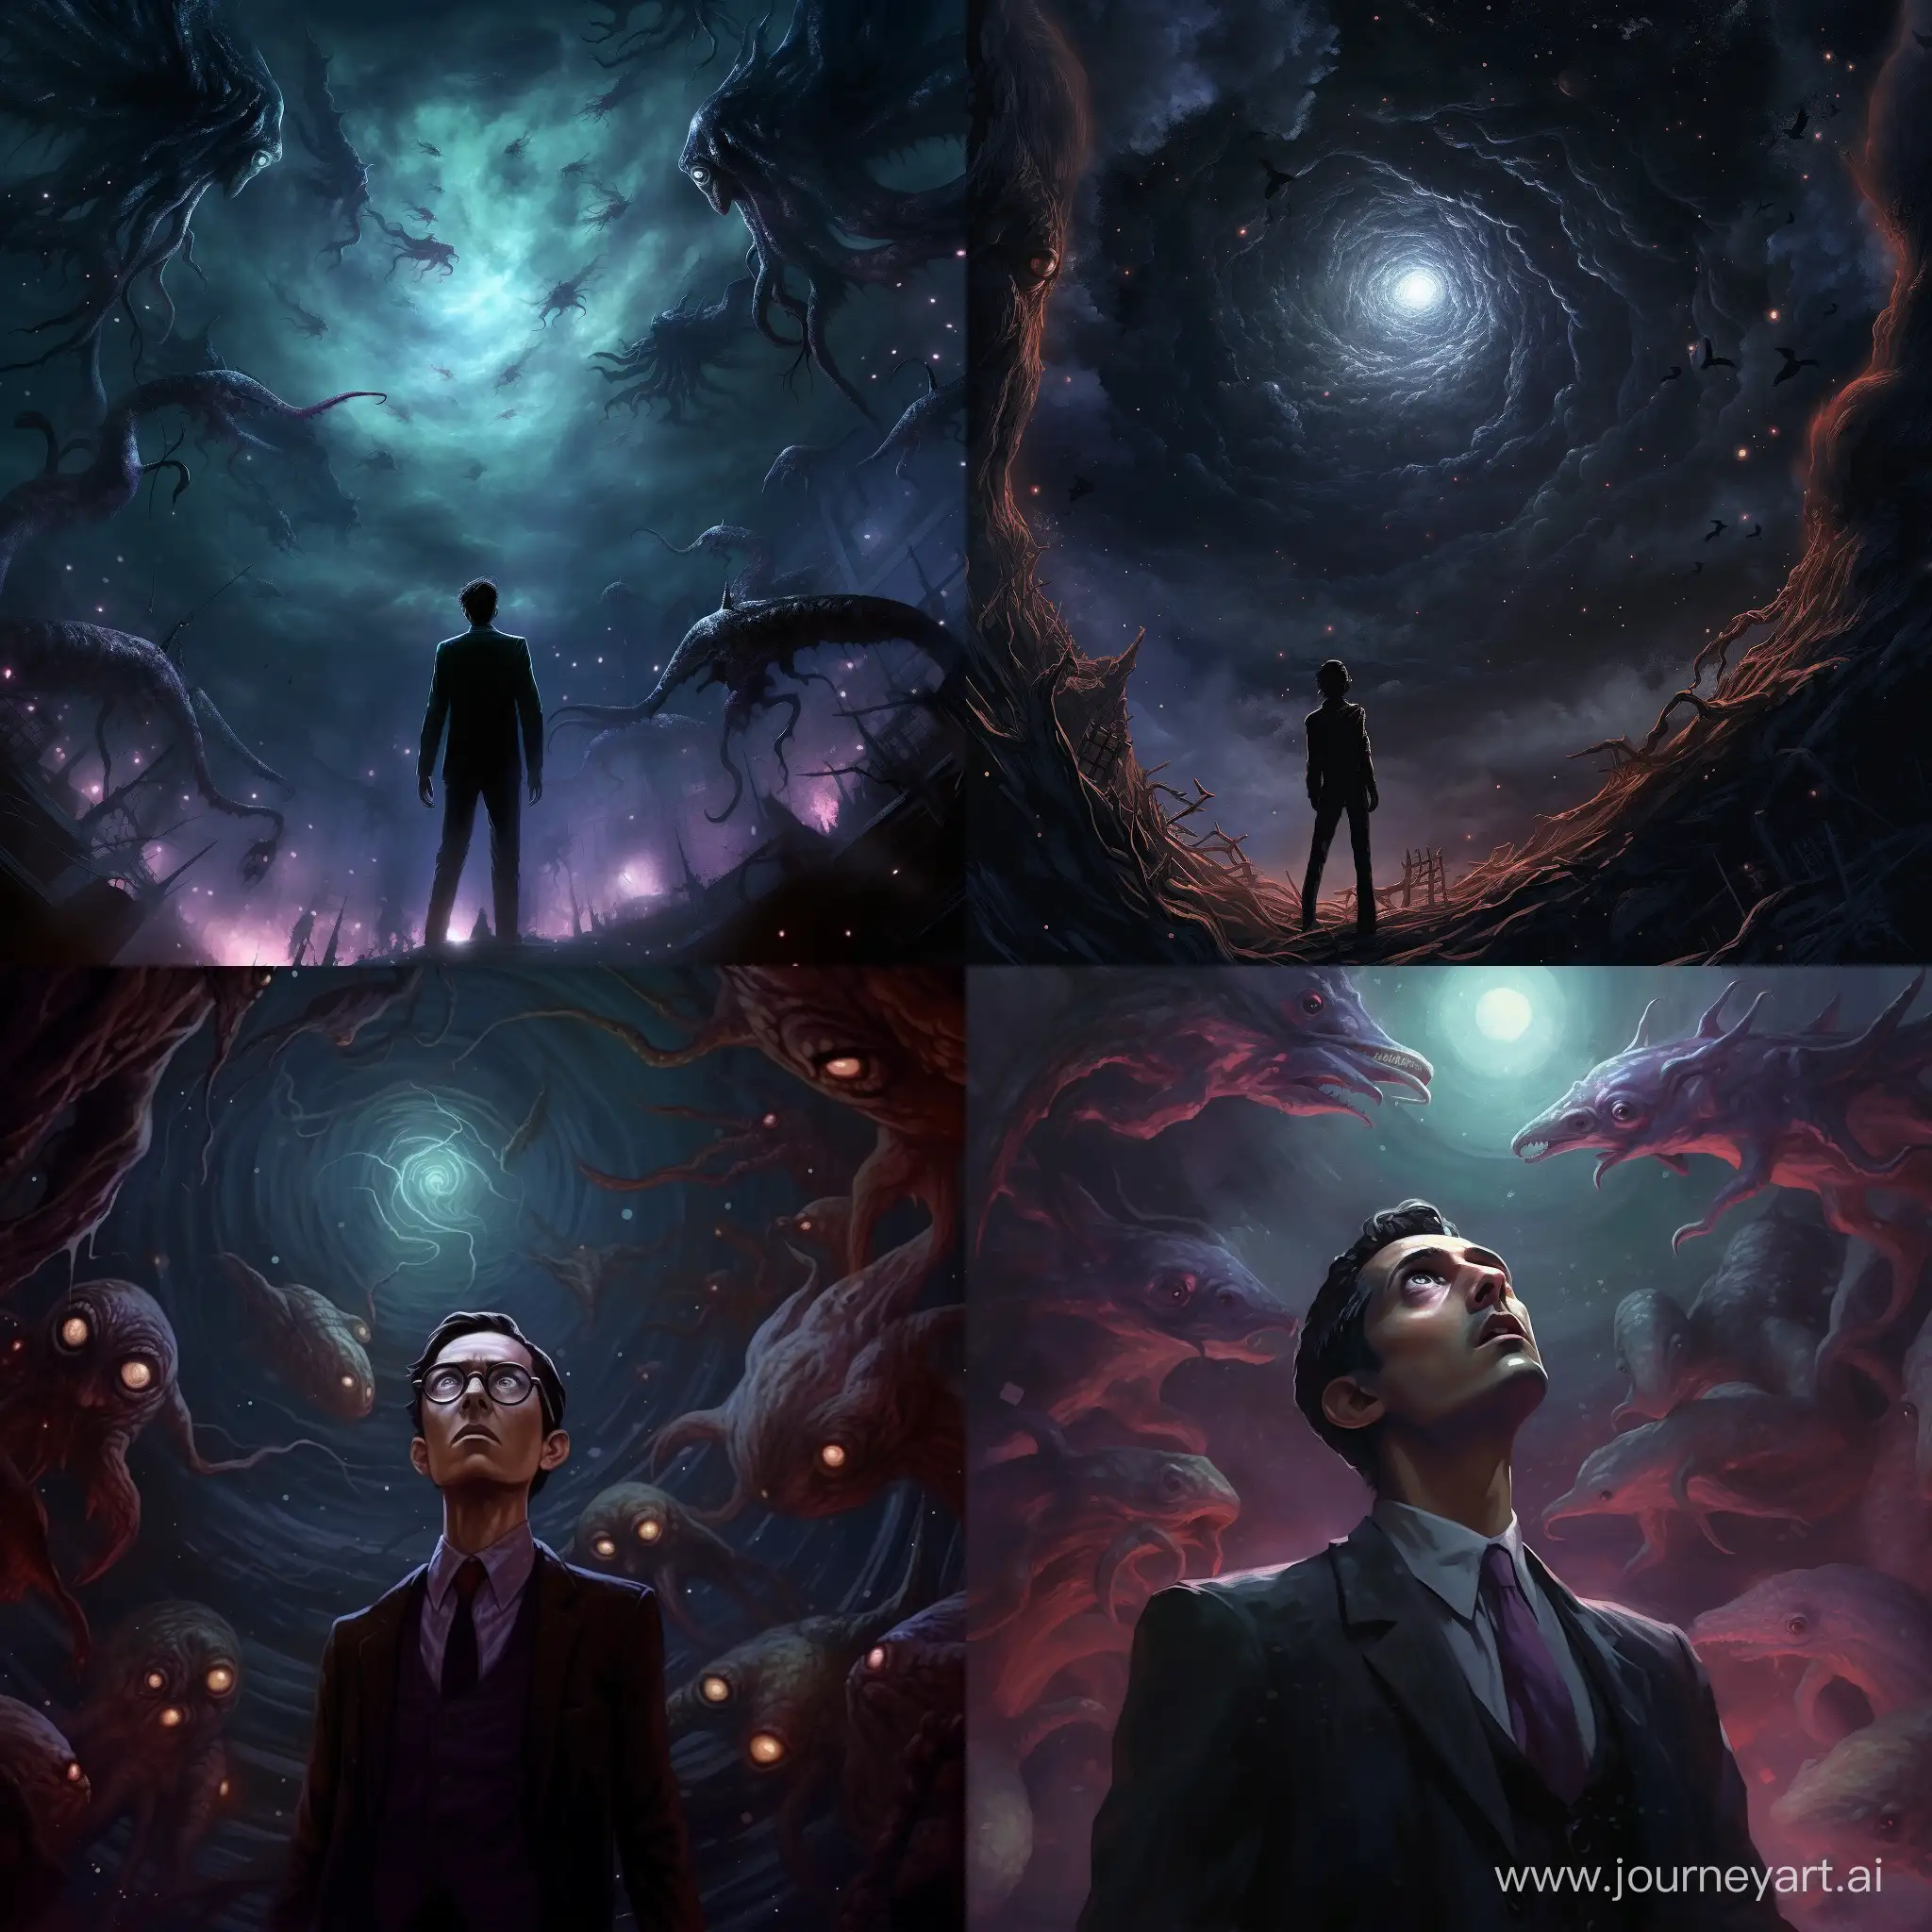 Look up to the sky, see the stars? they're eyes, Lovecraft, eldritch, sacry, unnatural